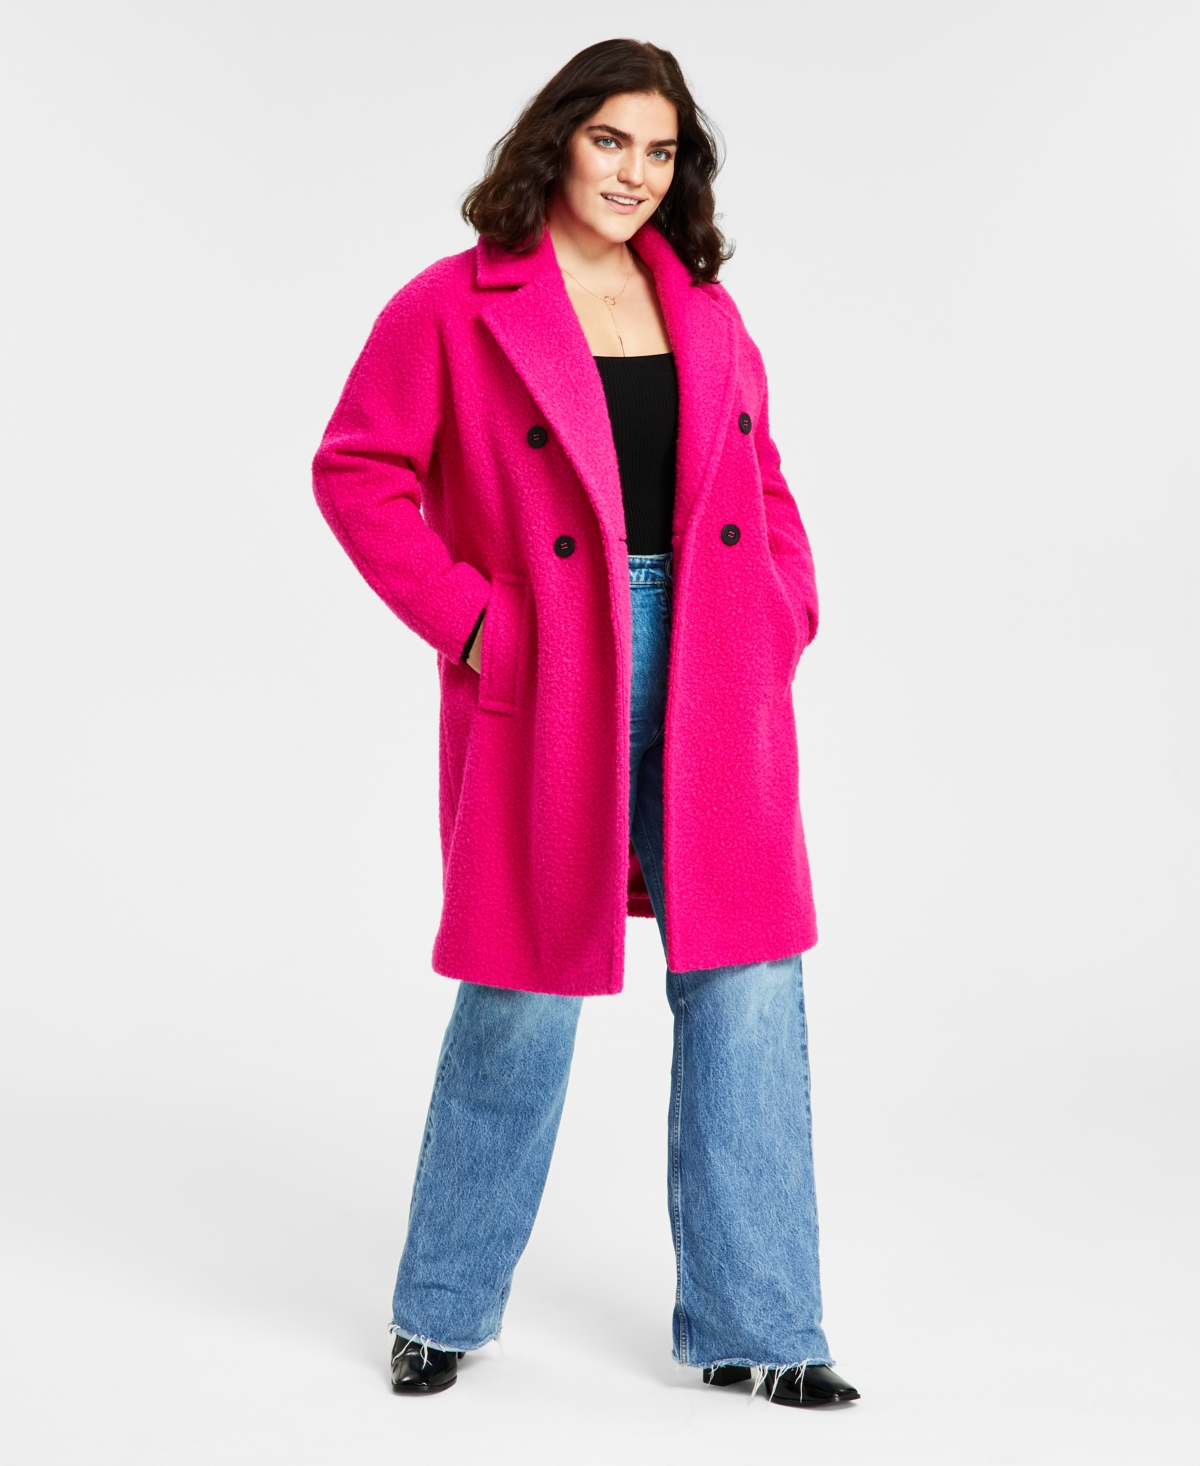 Women's Plus Size Double-Breasted Boucle Walker Coat, Created for Macy's - Bright Pink